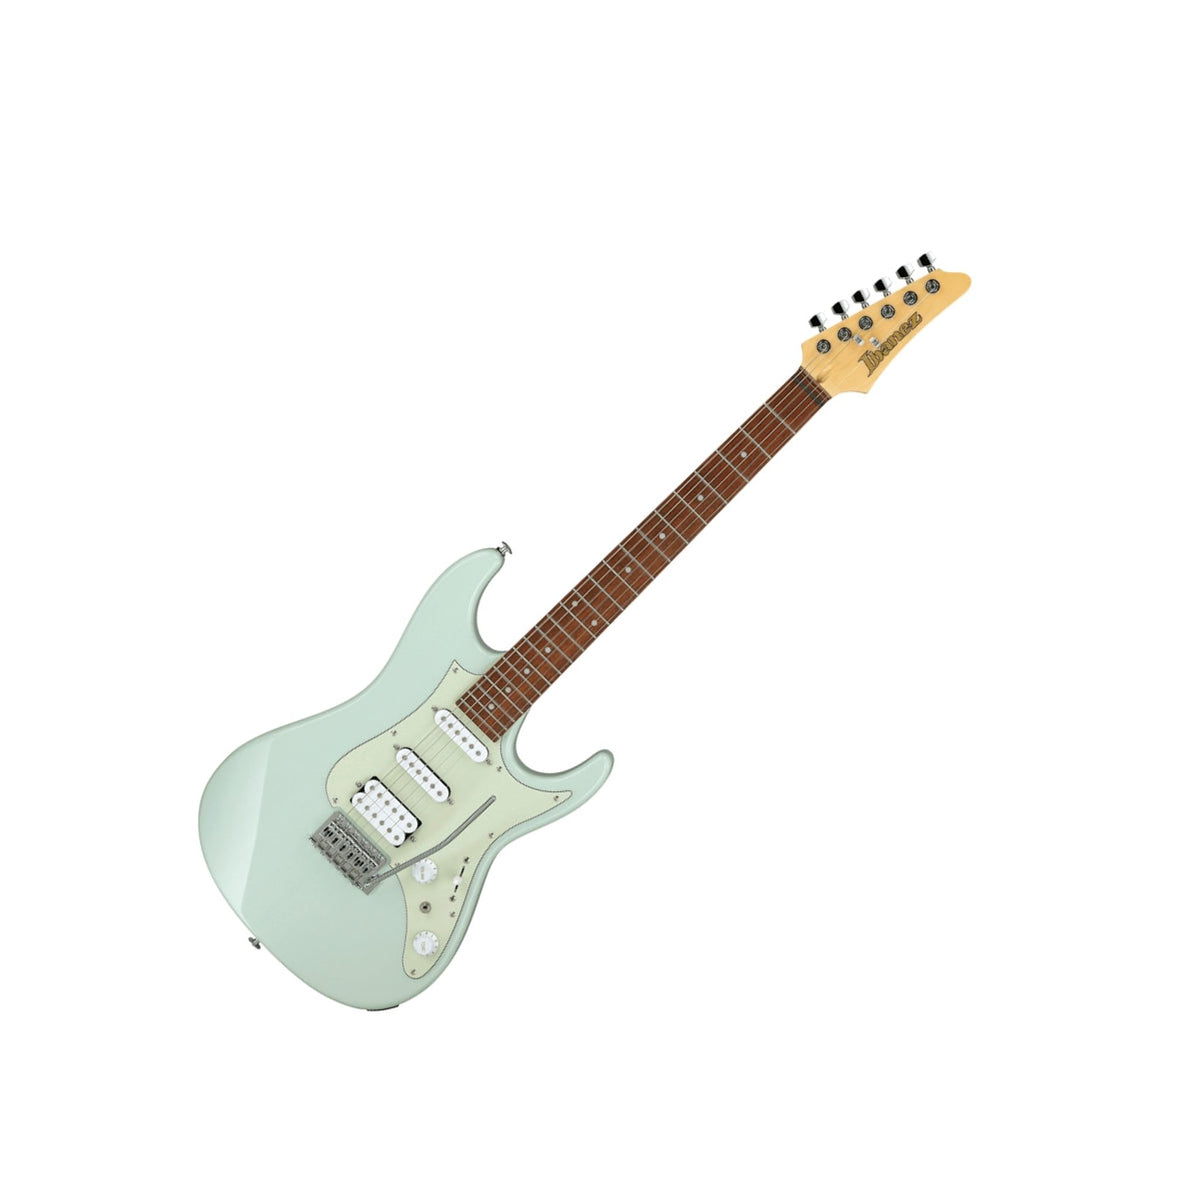 The Ibanez AZES40 Electric Guitar incorporates all the staples the Ibanez brand is famous for, creating a streamlined, enjoyable and fun experience.